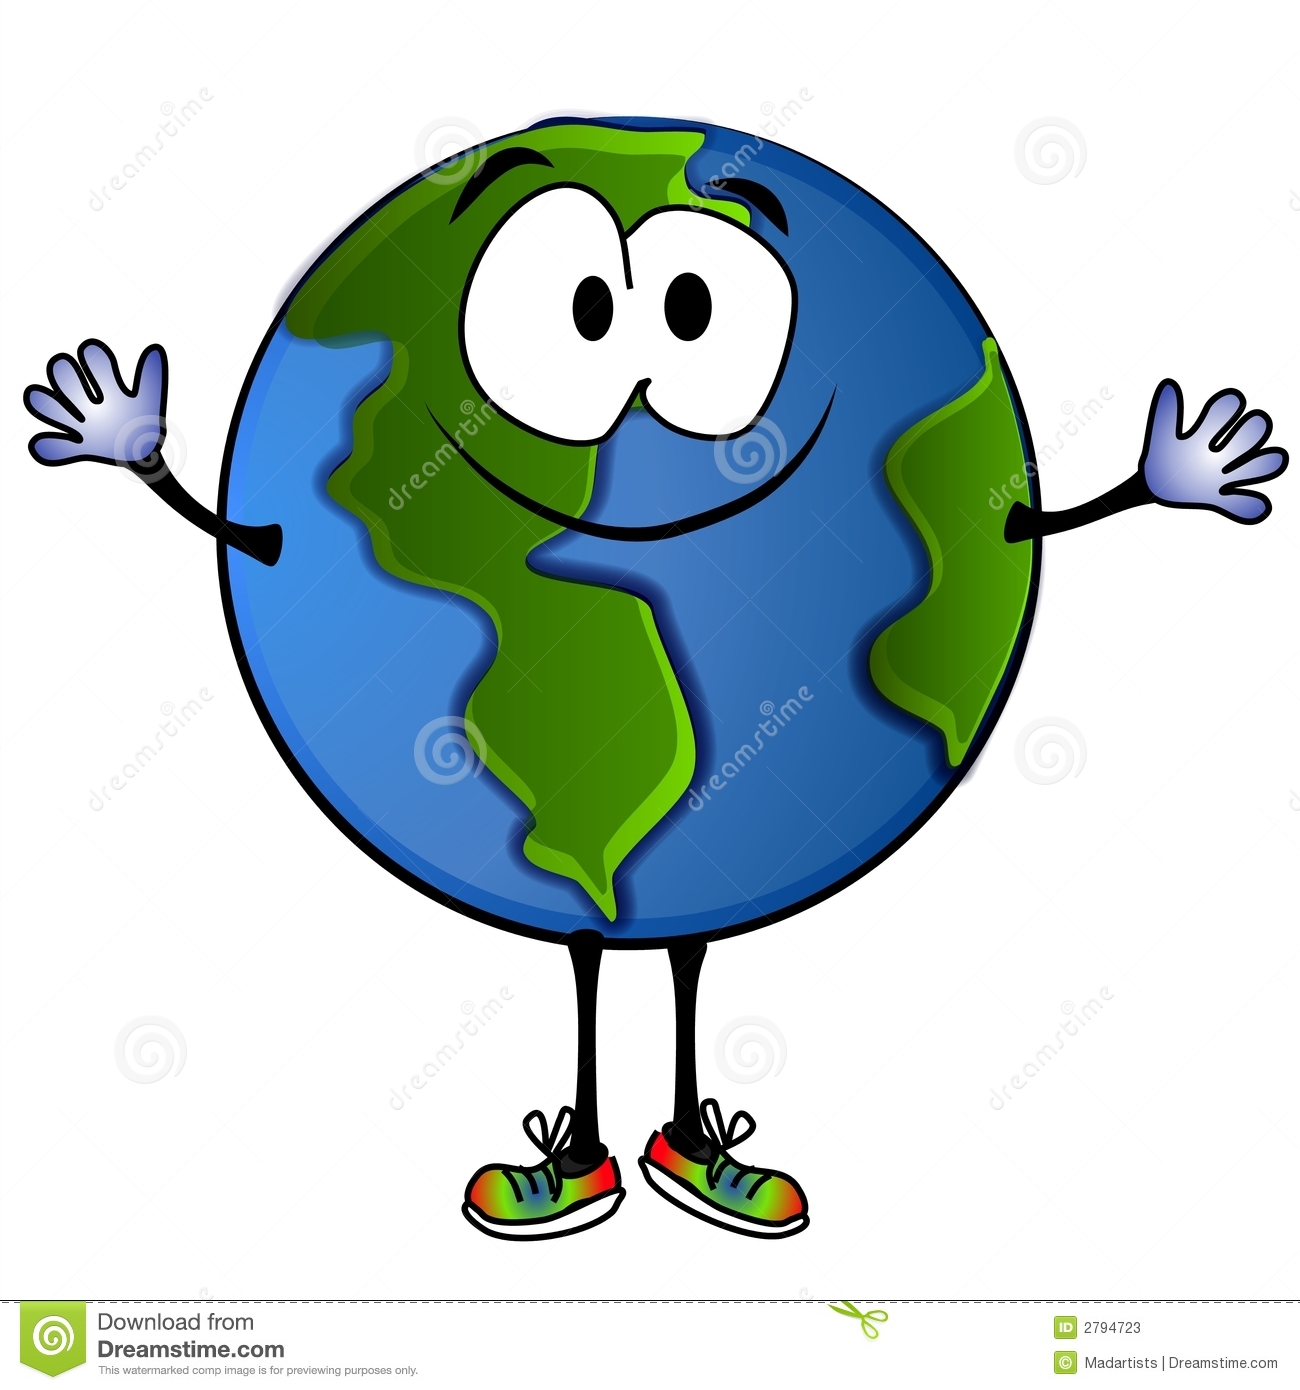 Clip Art Cartoon Illustration Of A Big Fat Smiling Planet Earth With